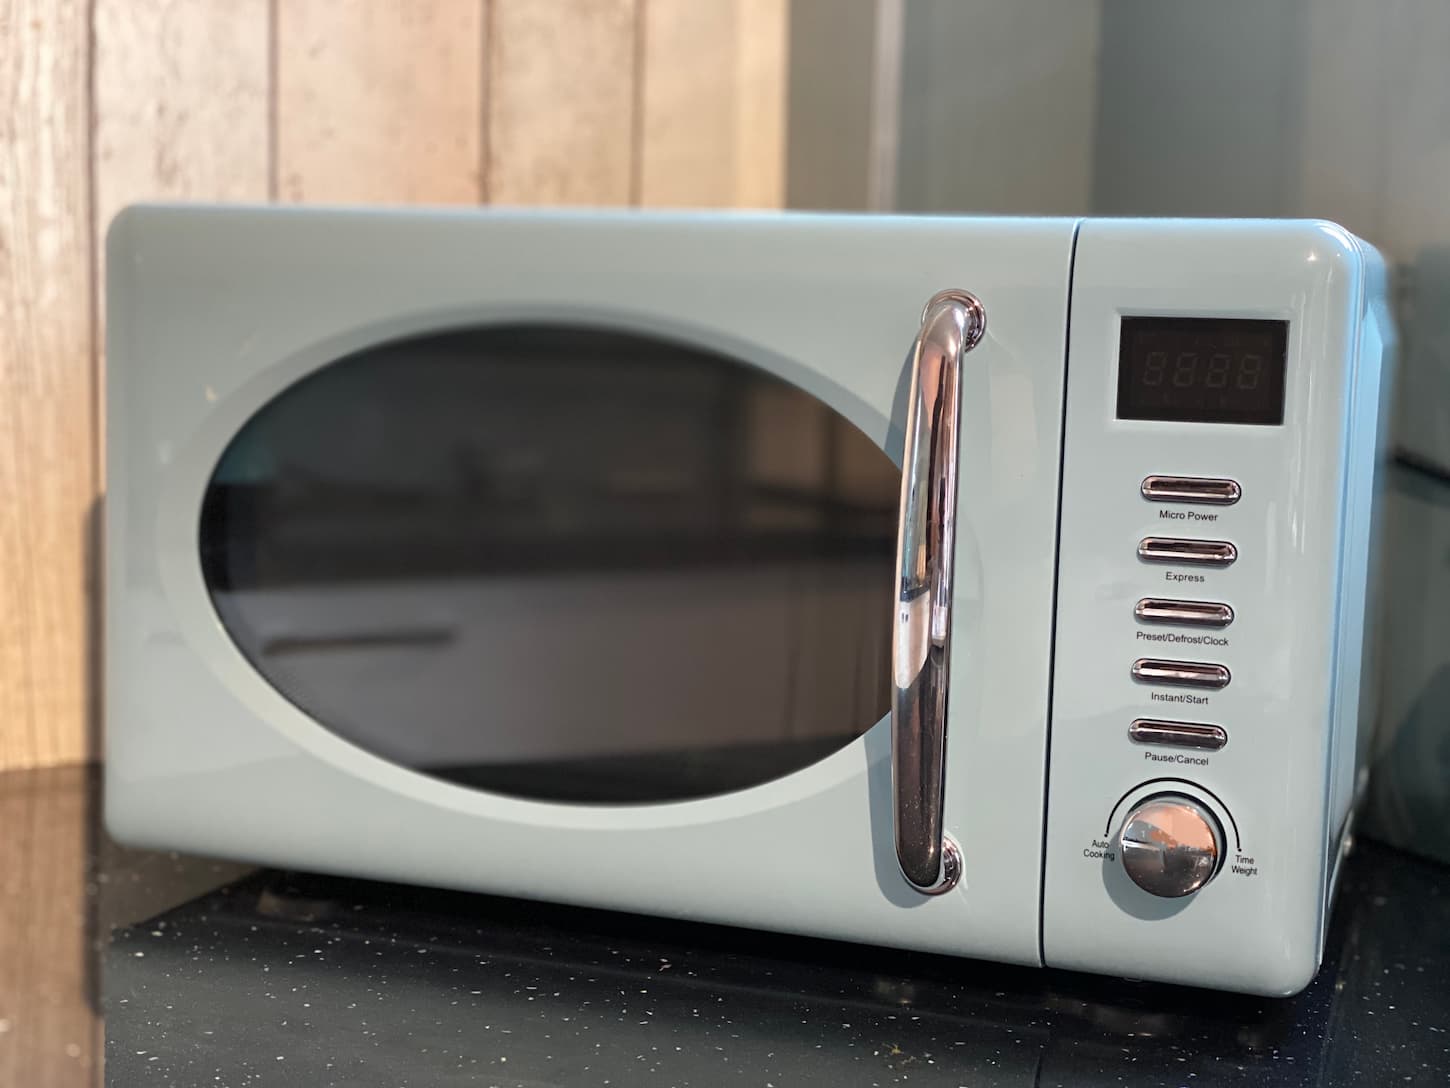 Where to Put a Microwave in a Tiny Kitchen?